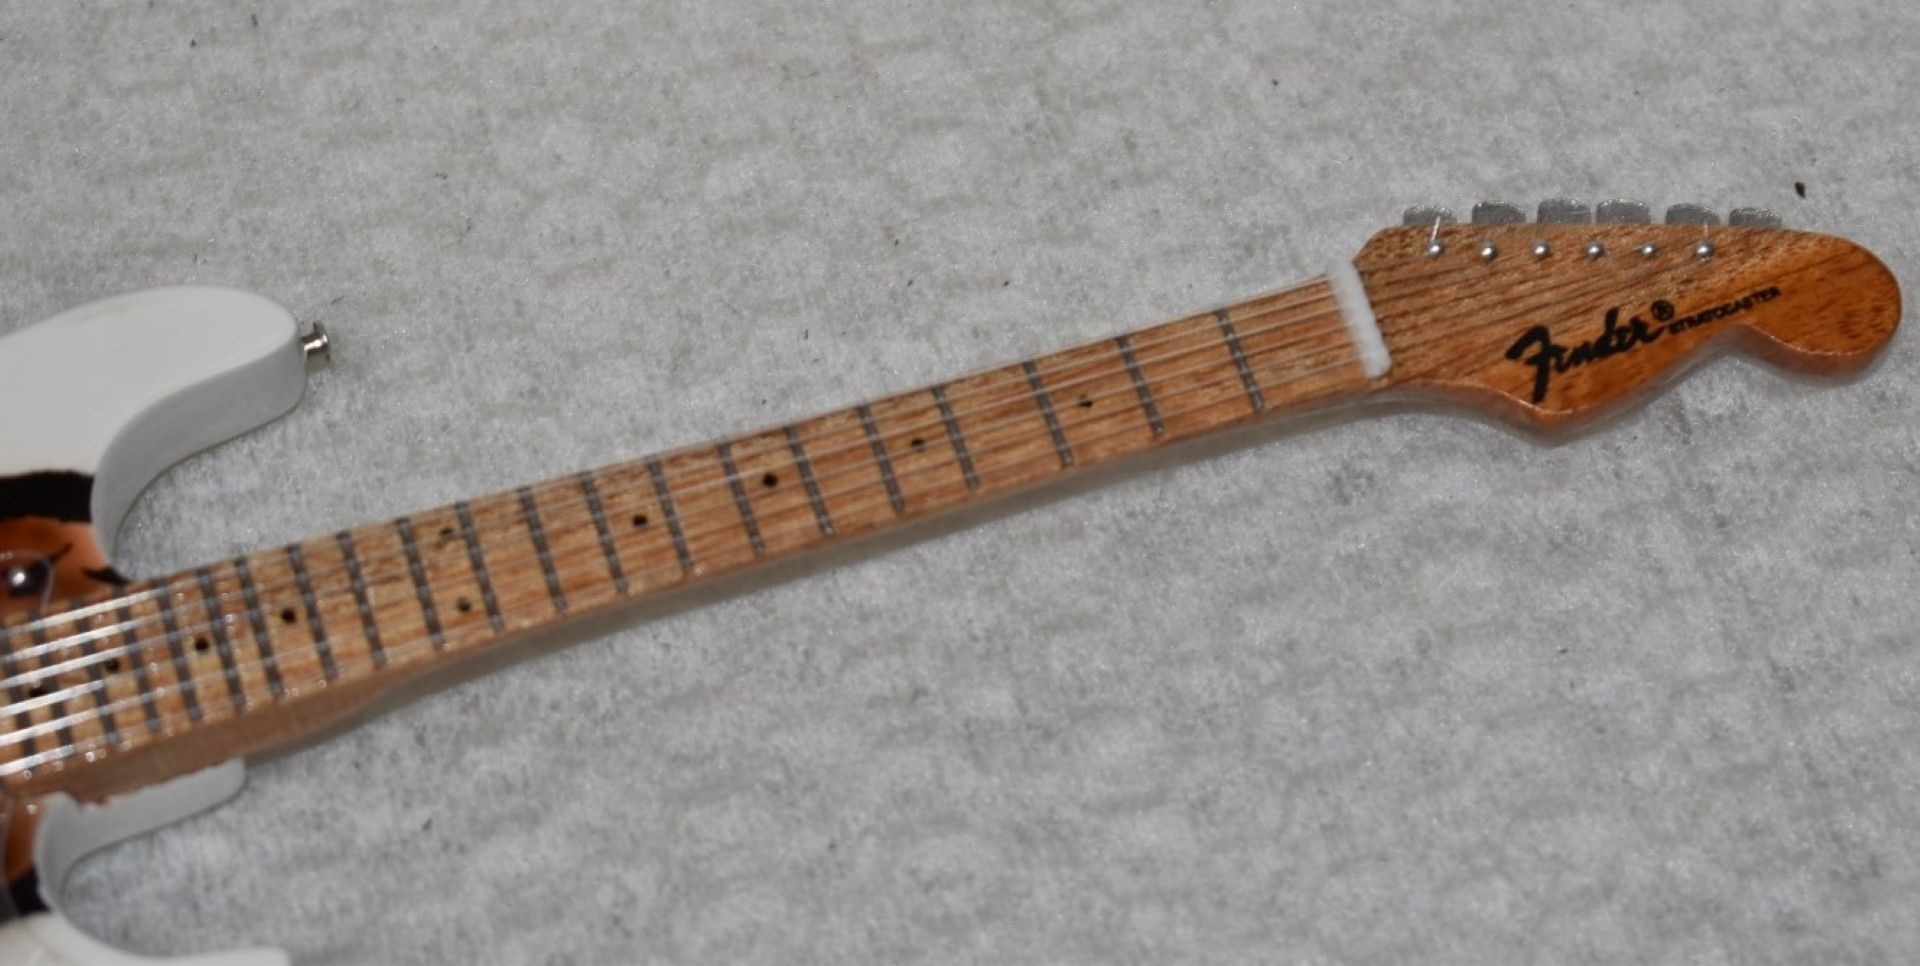 1 x Miniature Hand Made Guitar - David Bowie Fender Stratocaster - New & Unused - RRP £35 - Image 5 of 5